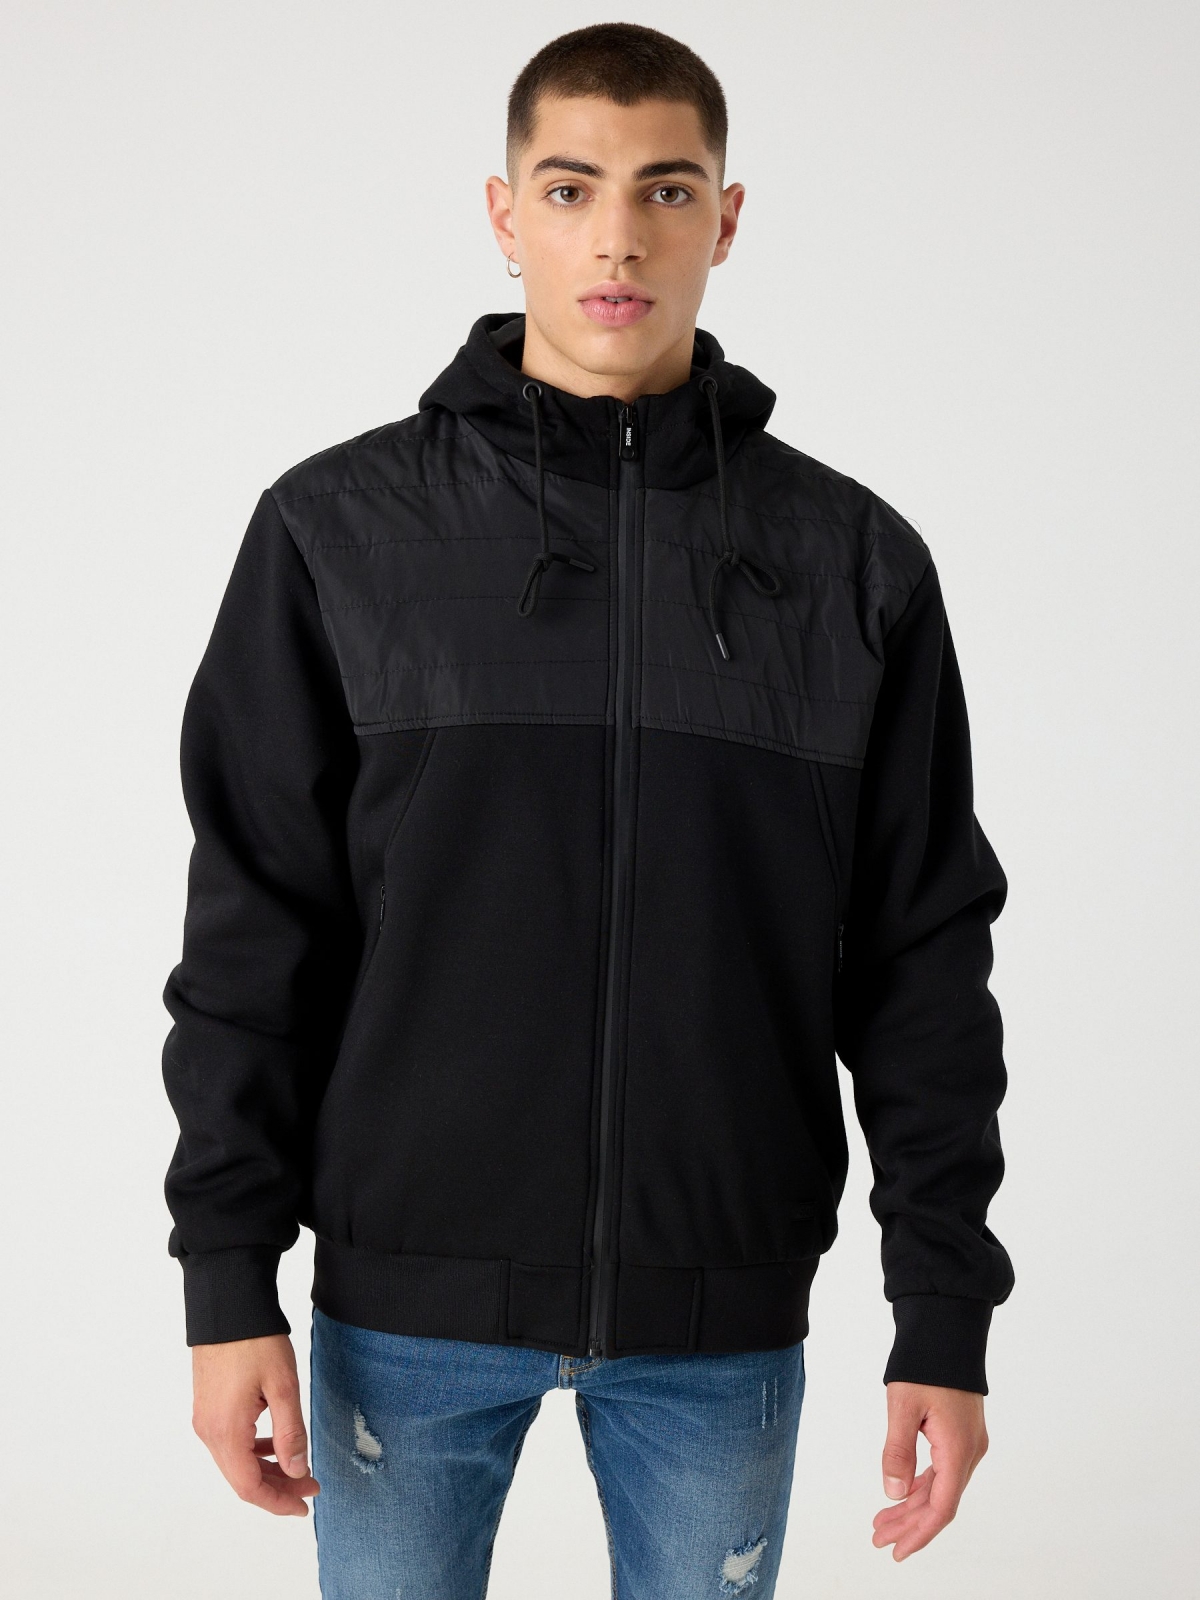 Combined hooded jacket black middle front view